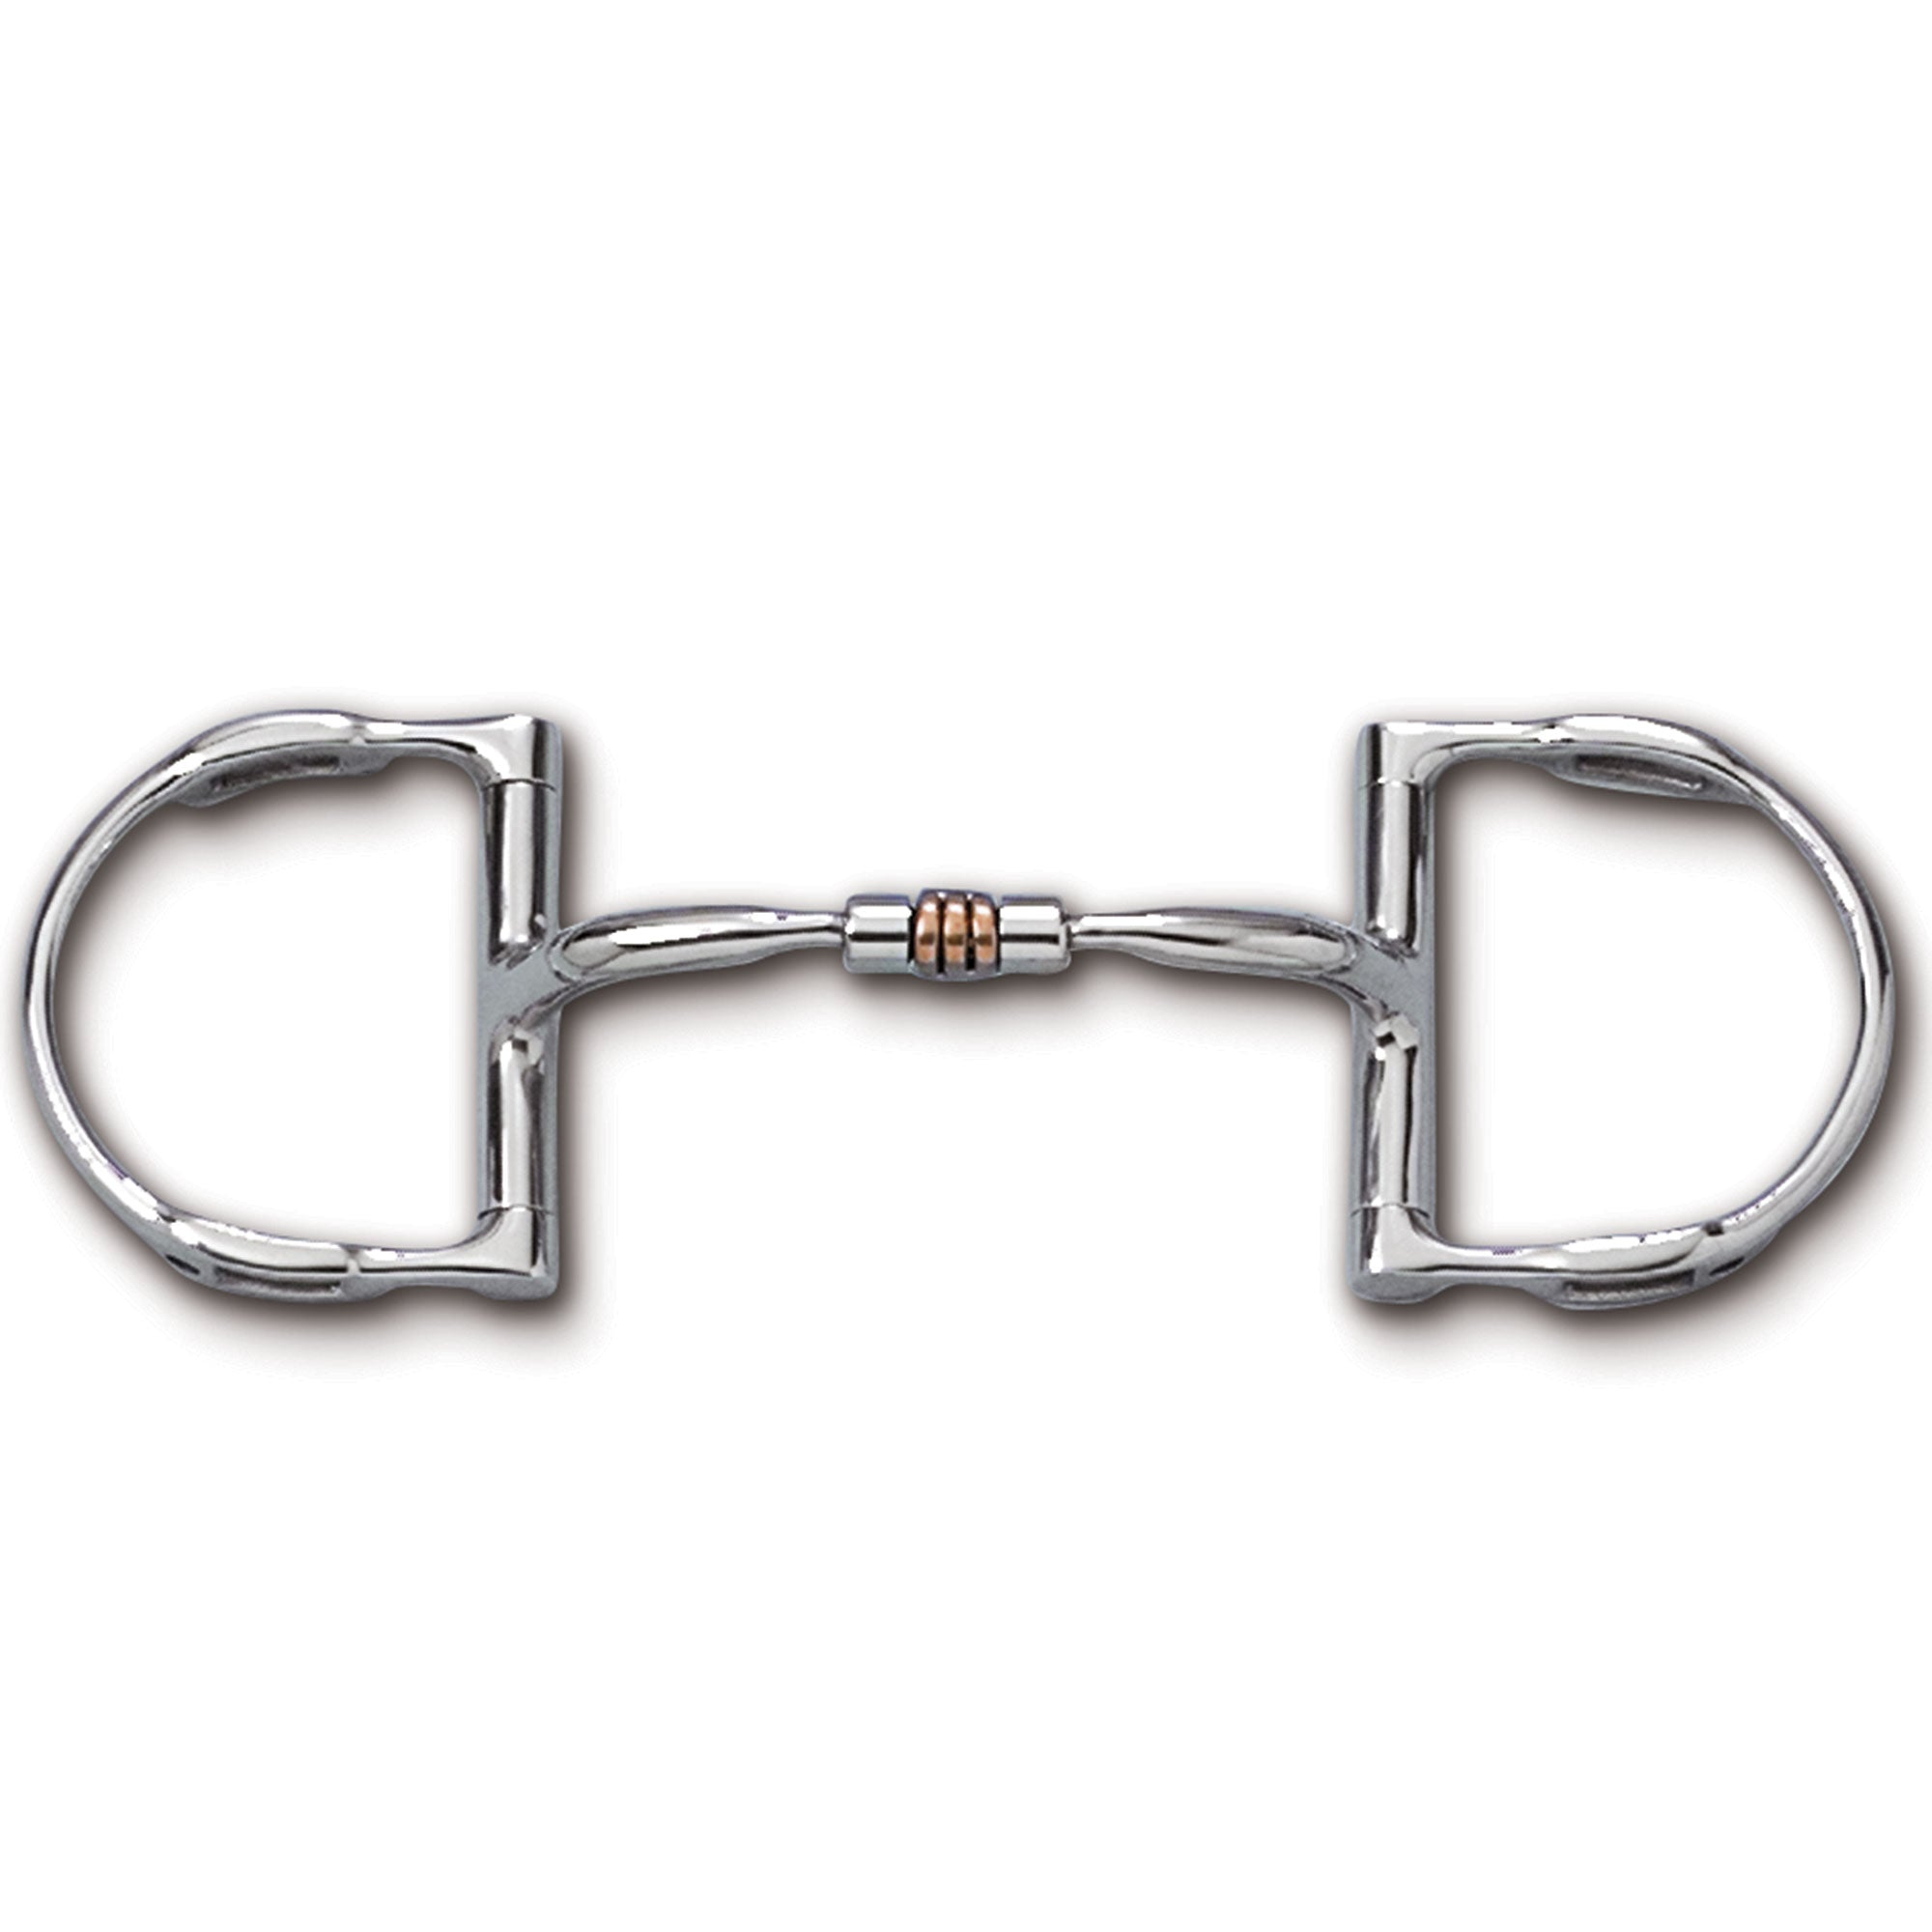 Nathe Loose Ring snaffle 20 mm single jointed | Sprenger